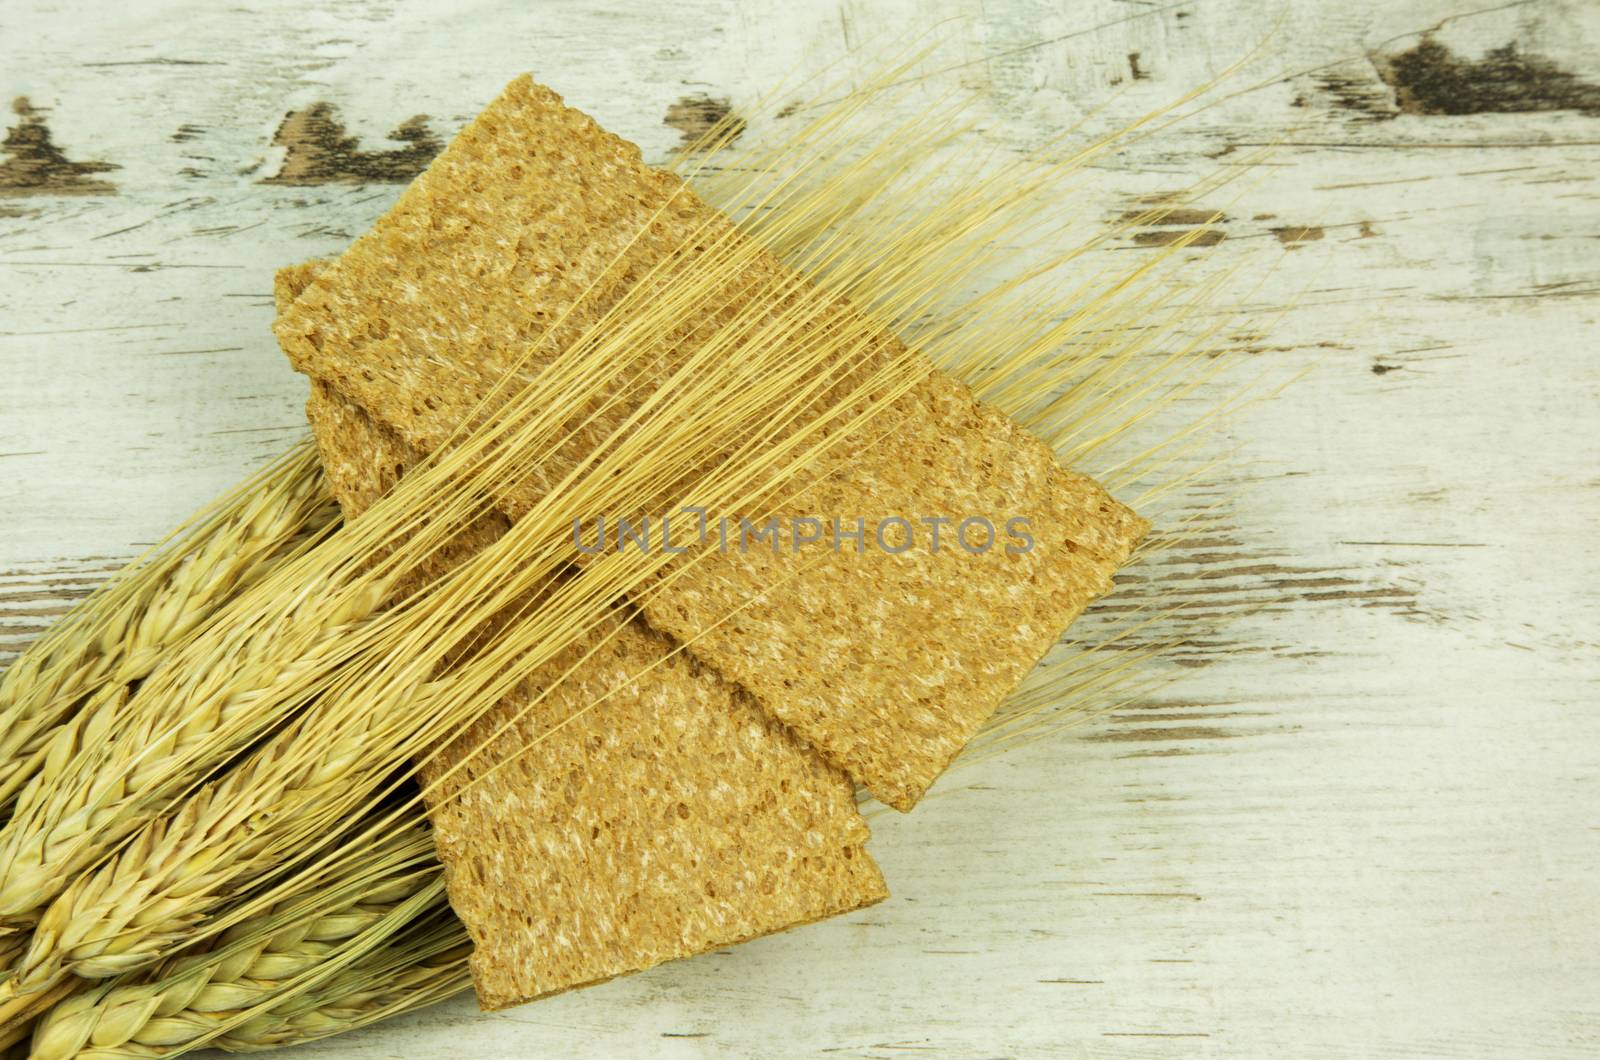 Two crisp bread and ears of corn on wooden background i  vintage style. Flat,horizontal view.